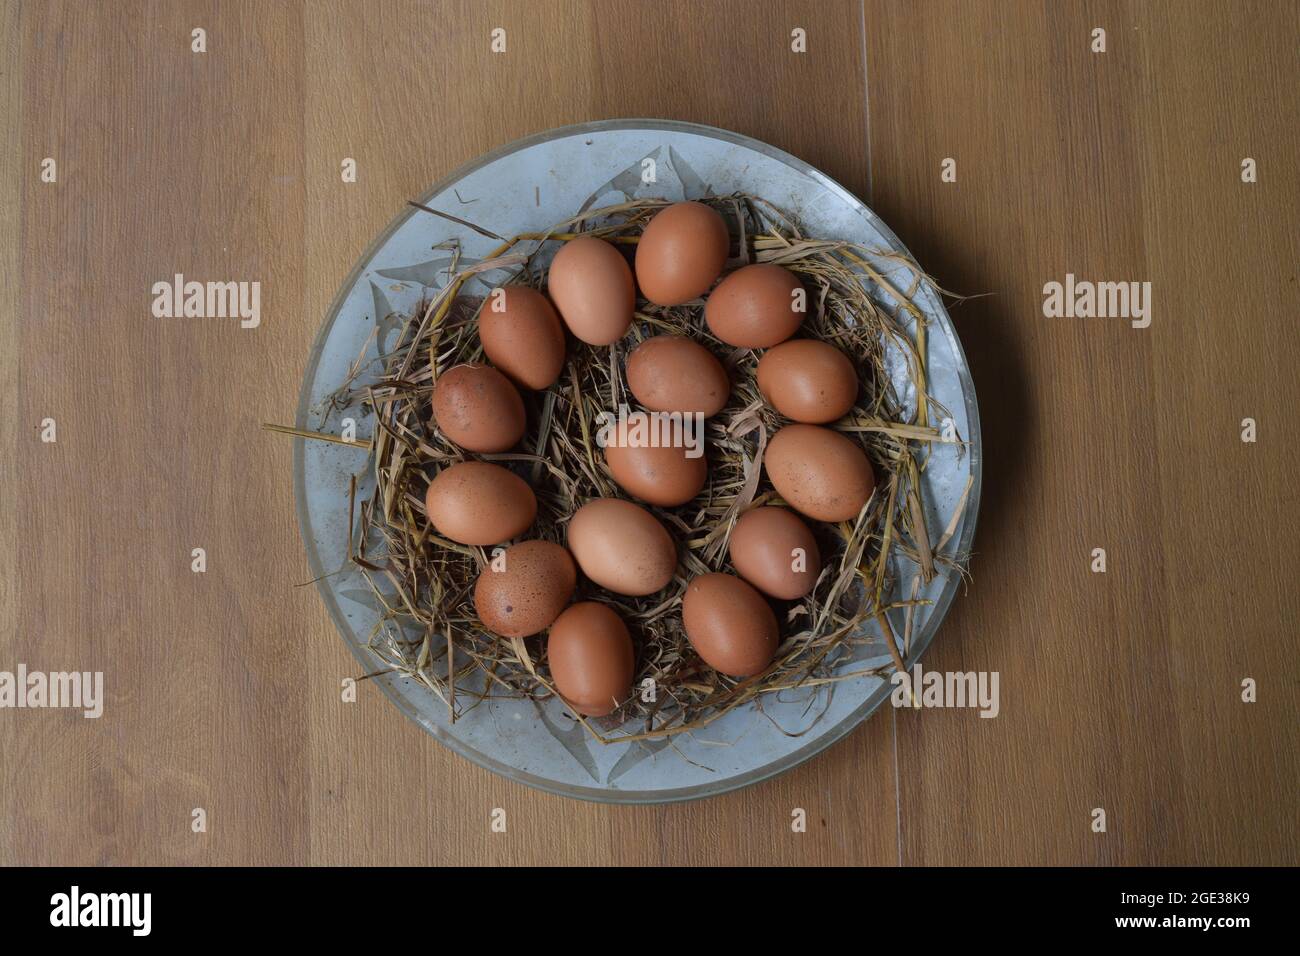 Fresh eggs on the plate, fresh eggs collection with eggshell and straw layer on the plate in tile background, Hot raw eggs cluster, cluster of eggs Stock Photo